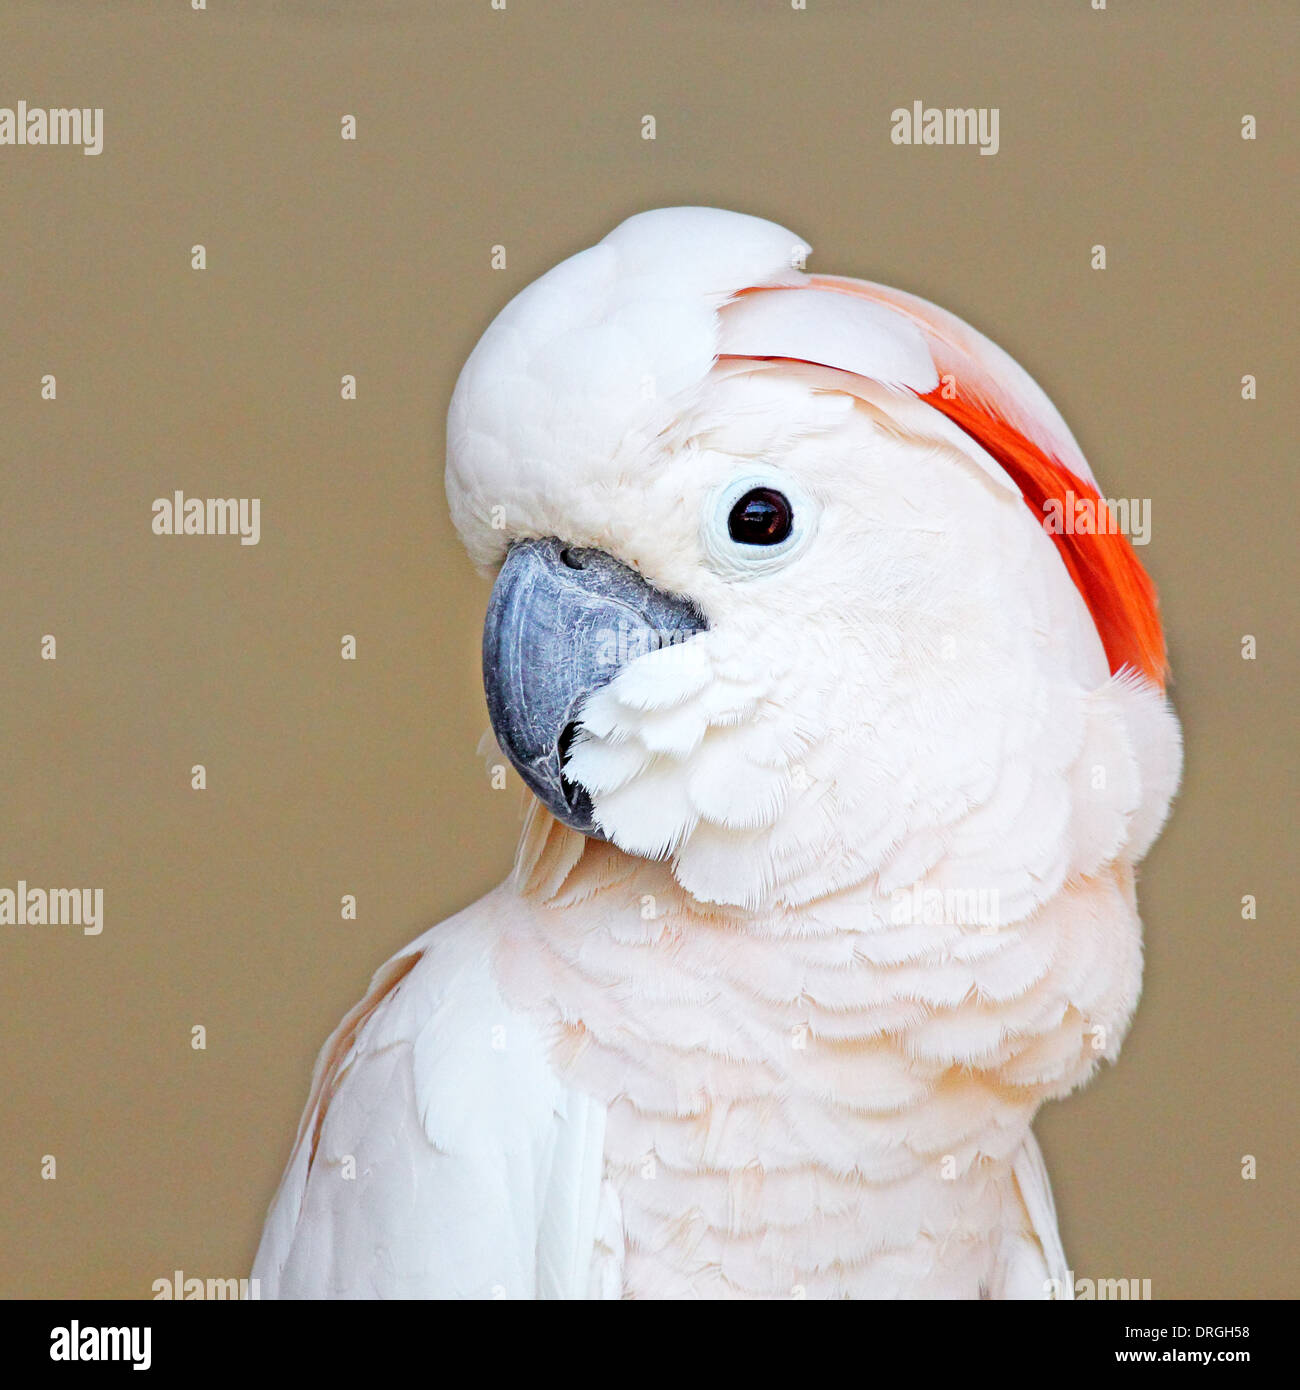 Portrait of a Moluccan Cockatoo (Cacatua moluccensis), or Salmon-crested Cockatoo, with uniform brown background Stock Photo